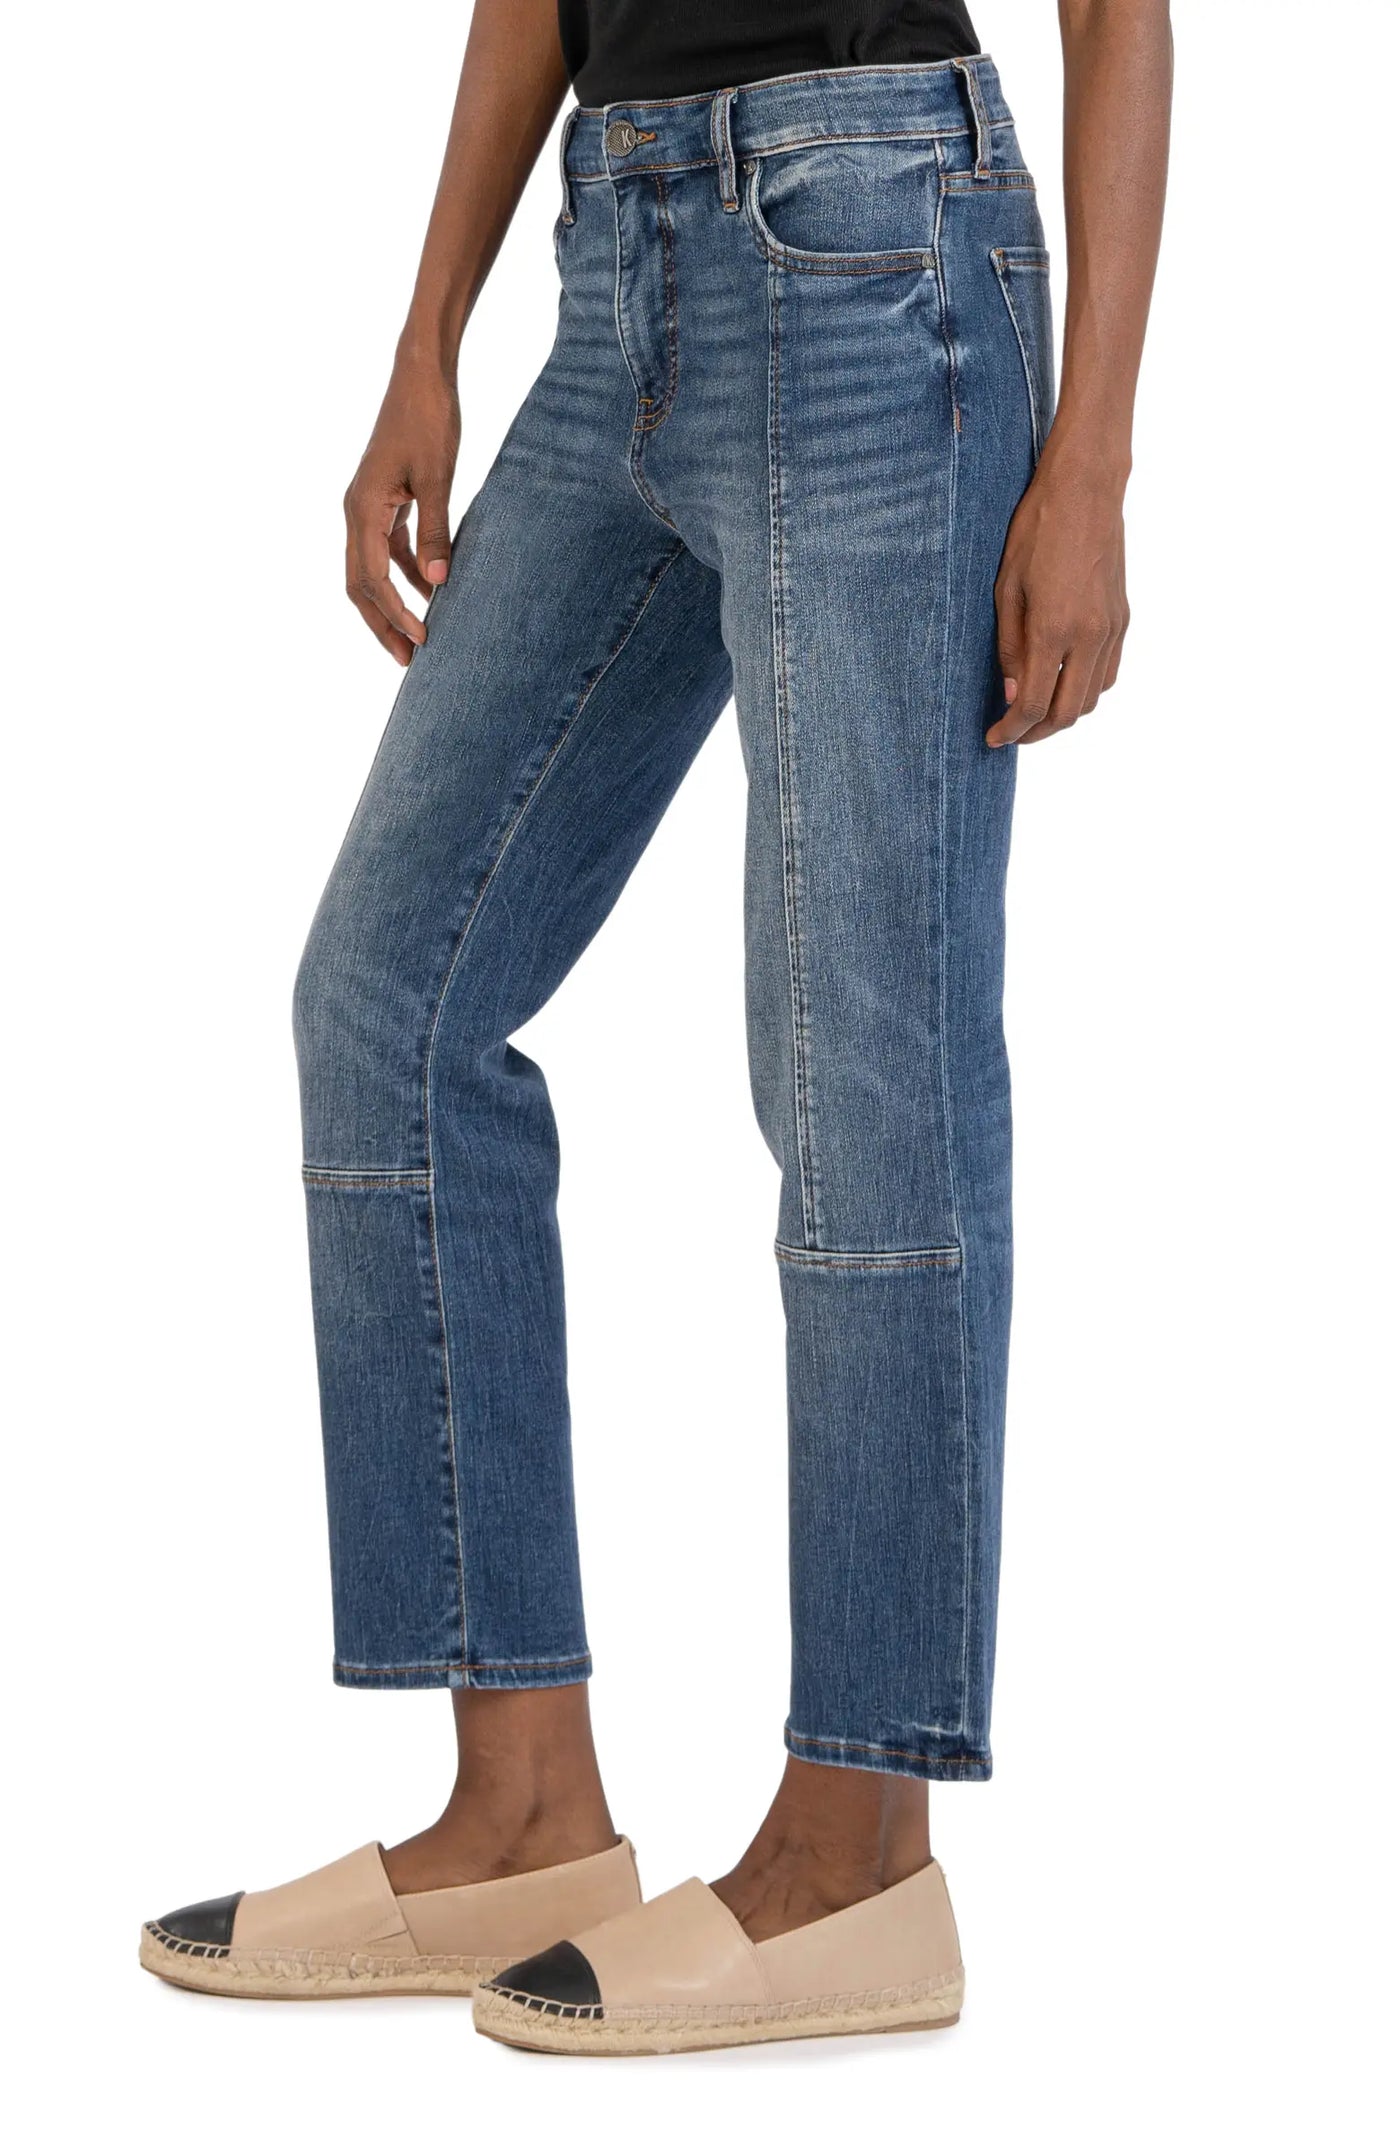 Kut From the Kloth Reese High Rise Fab Ab Straight Leg Jean, Stimulative Wash (Last one)